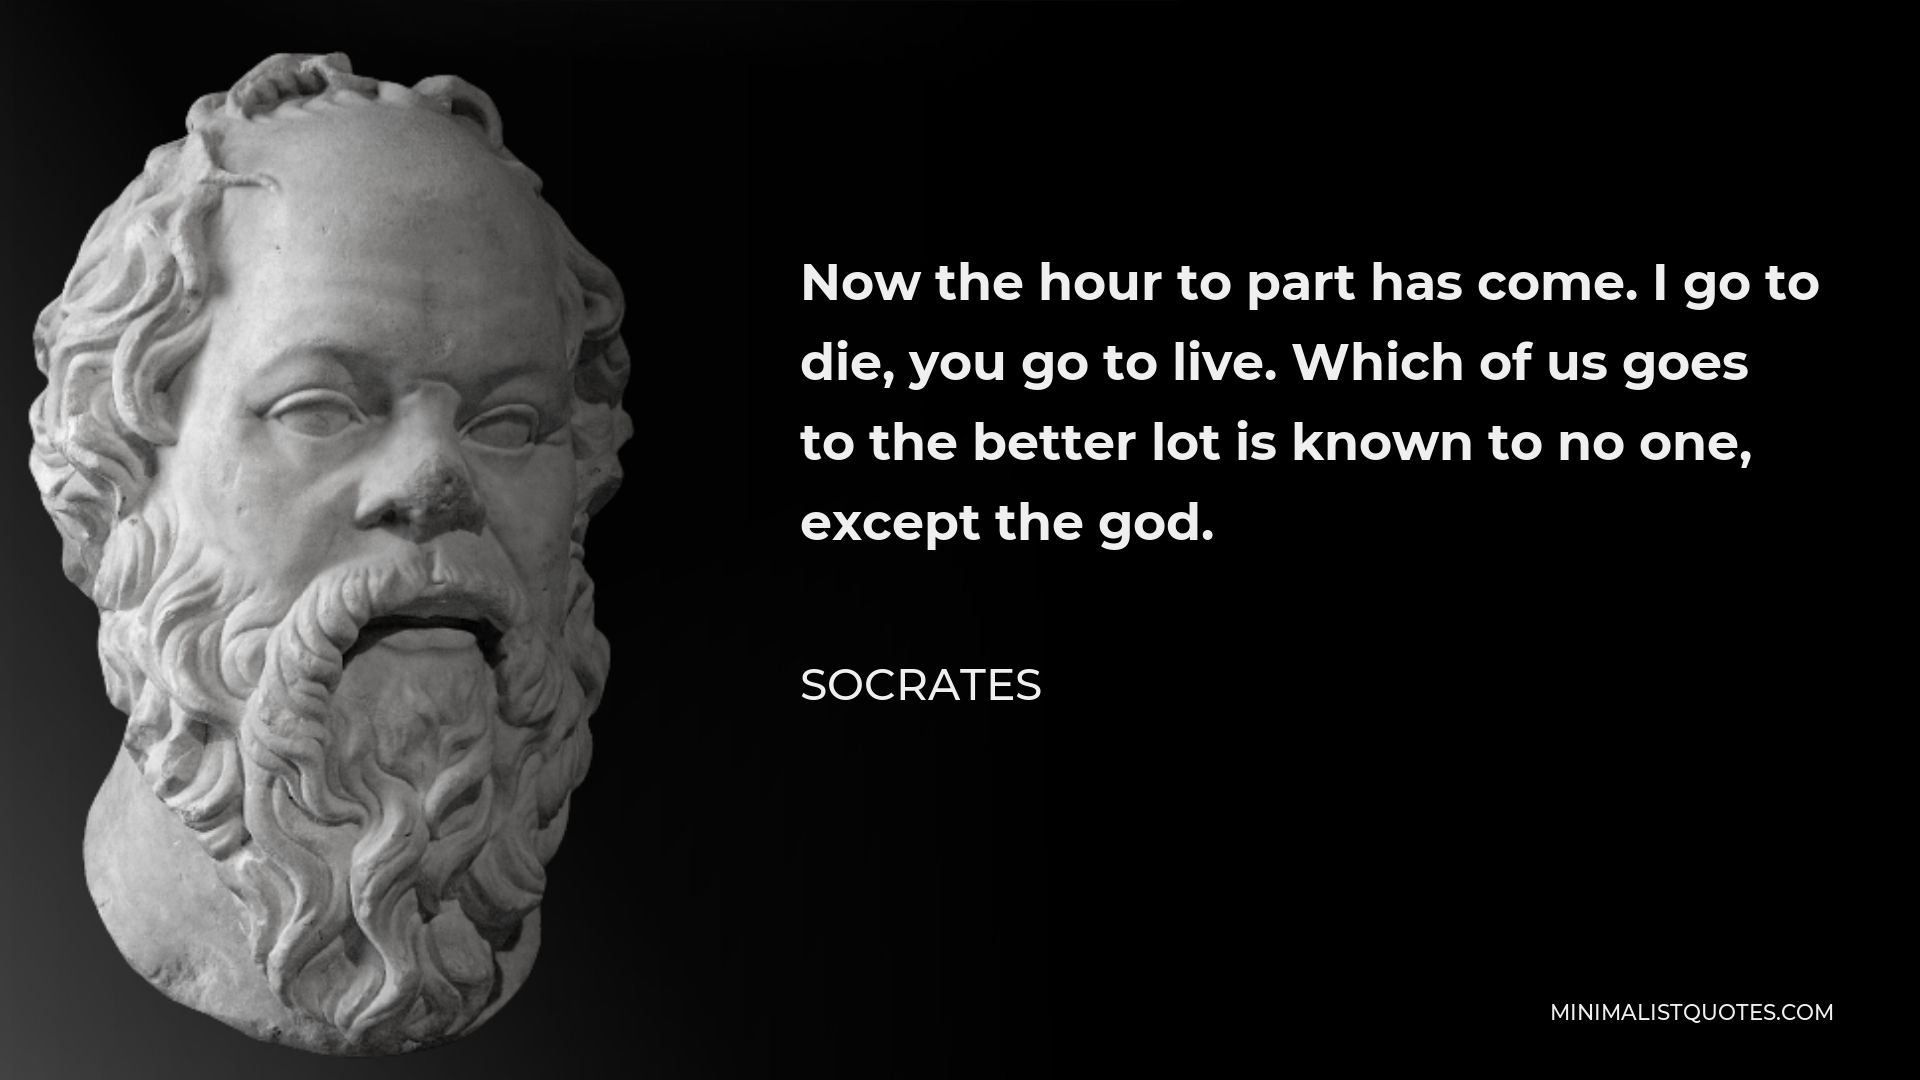 Socrates Quote - Now the hour to part has come. I go to die, you go to live. Which of us goes to the better lot is known to no one, except the god.